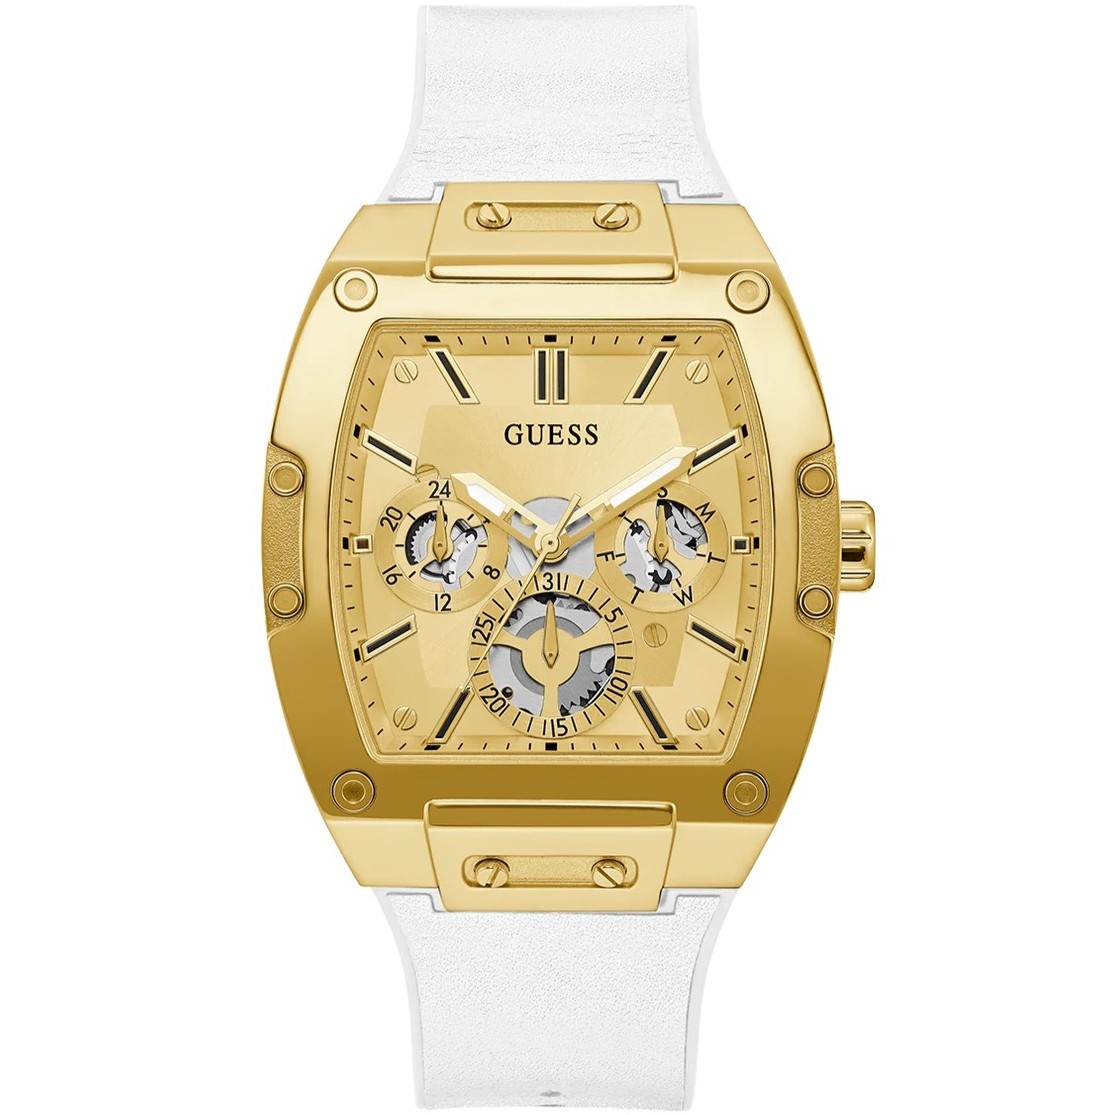 ĐỒNG HỒ ĐEO TAY GUESS WHITE GOLD TONE MULTI-FUNCTION WATCH GW0202G6 2